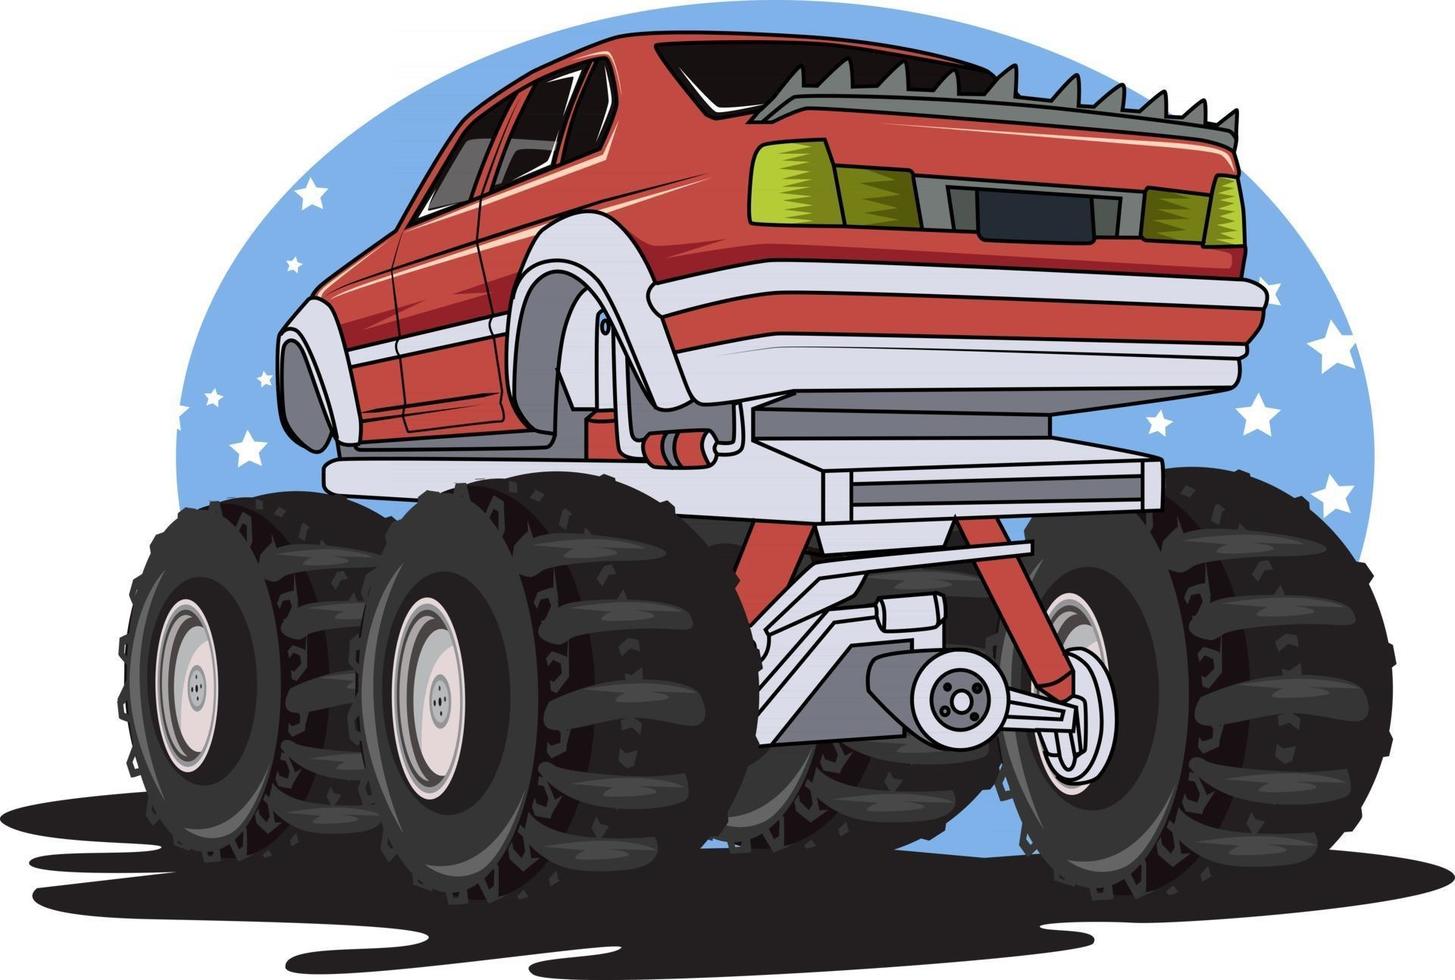 the red monster truck hand drawing vector